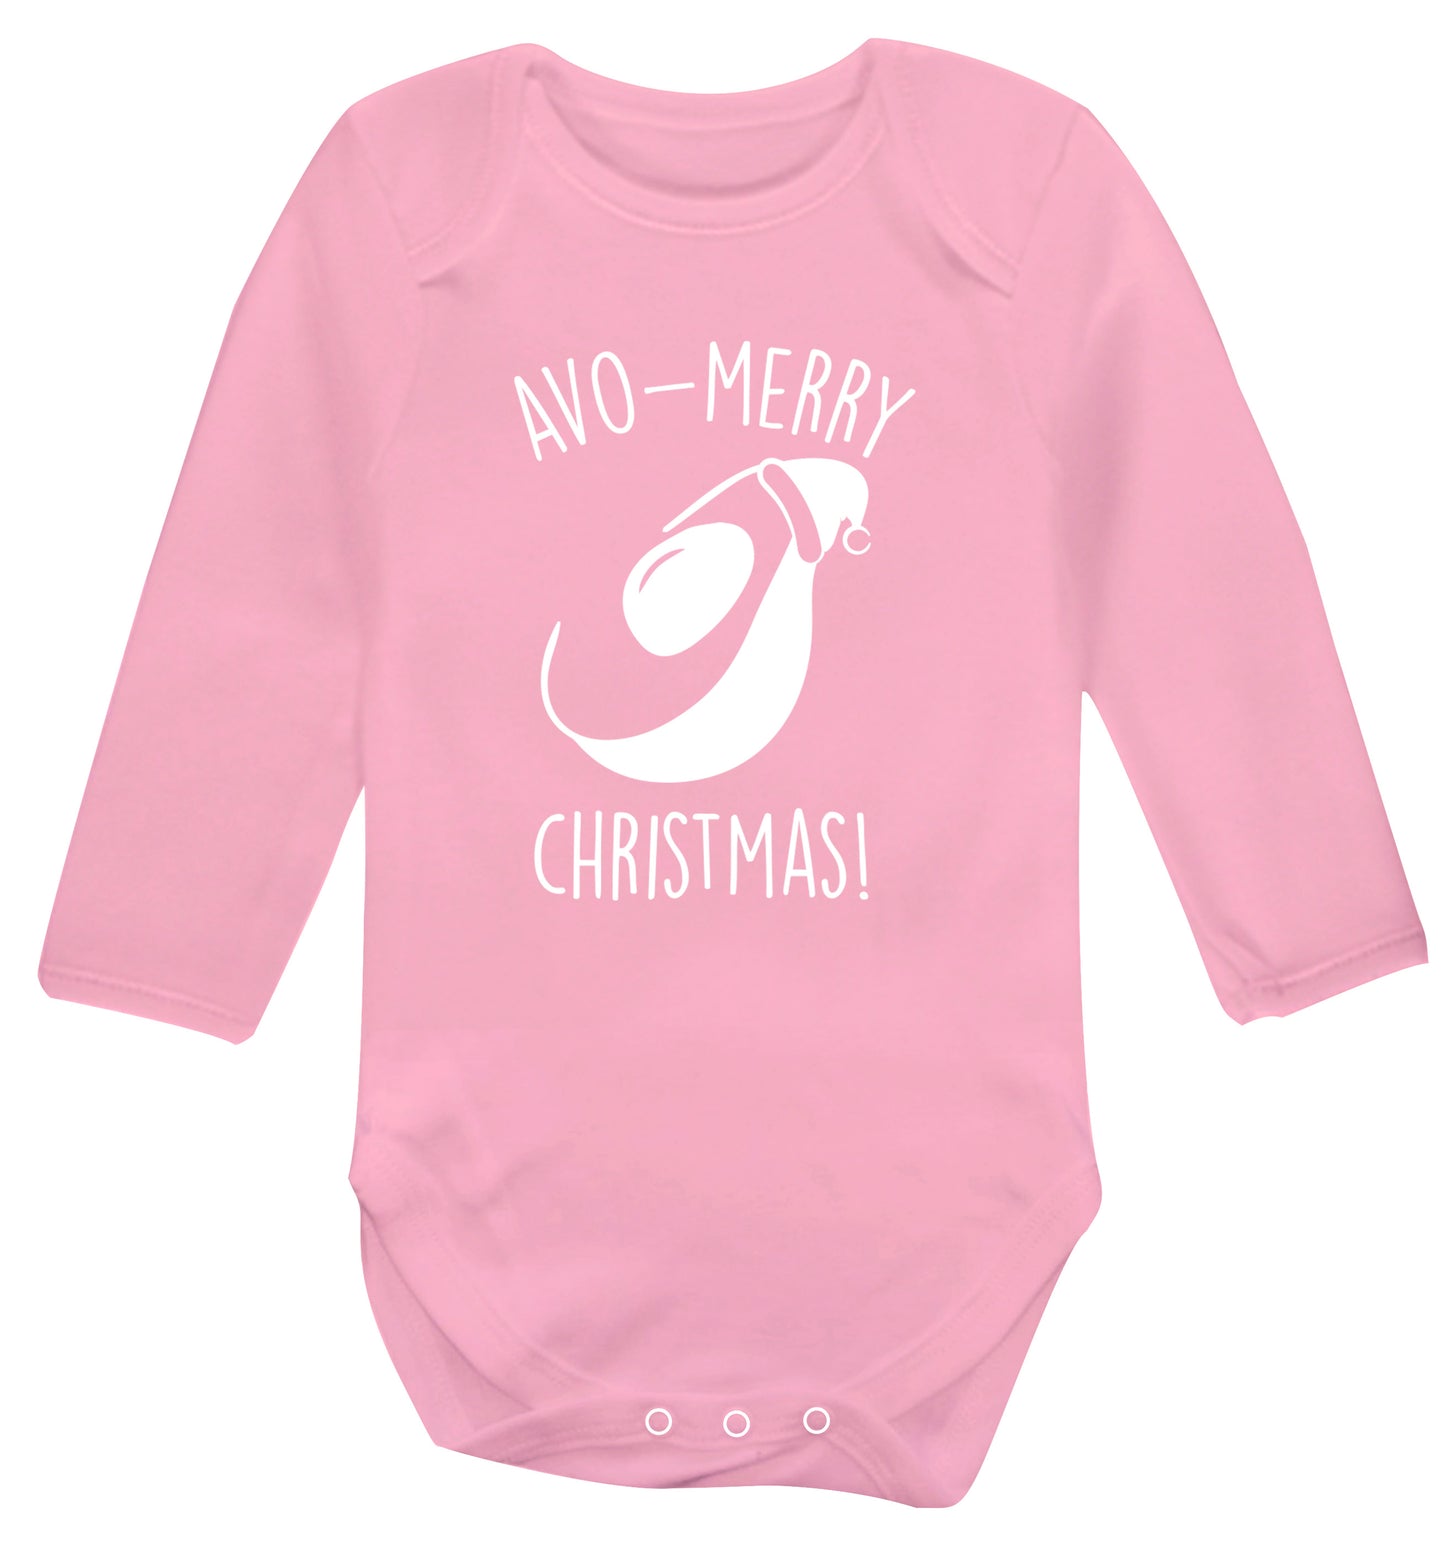 Avo-Merry Christmas Baby Vest long sleeved pale pink 6-12 months